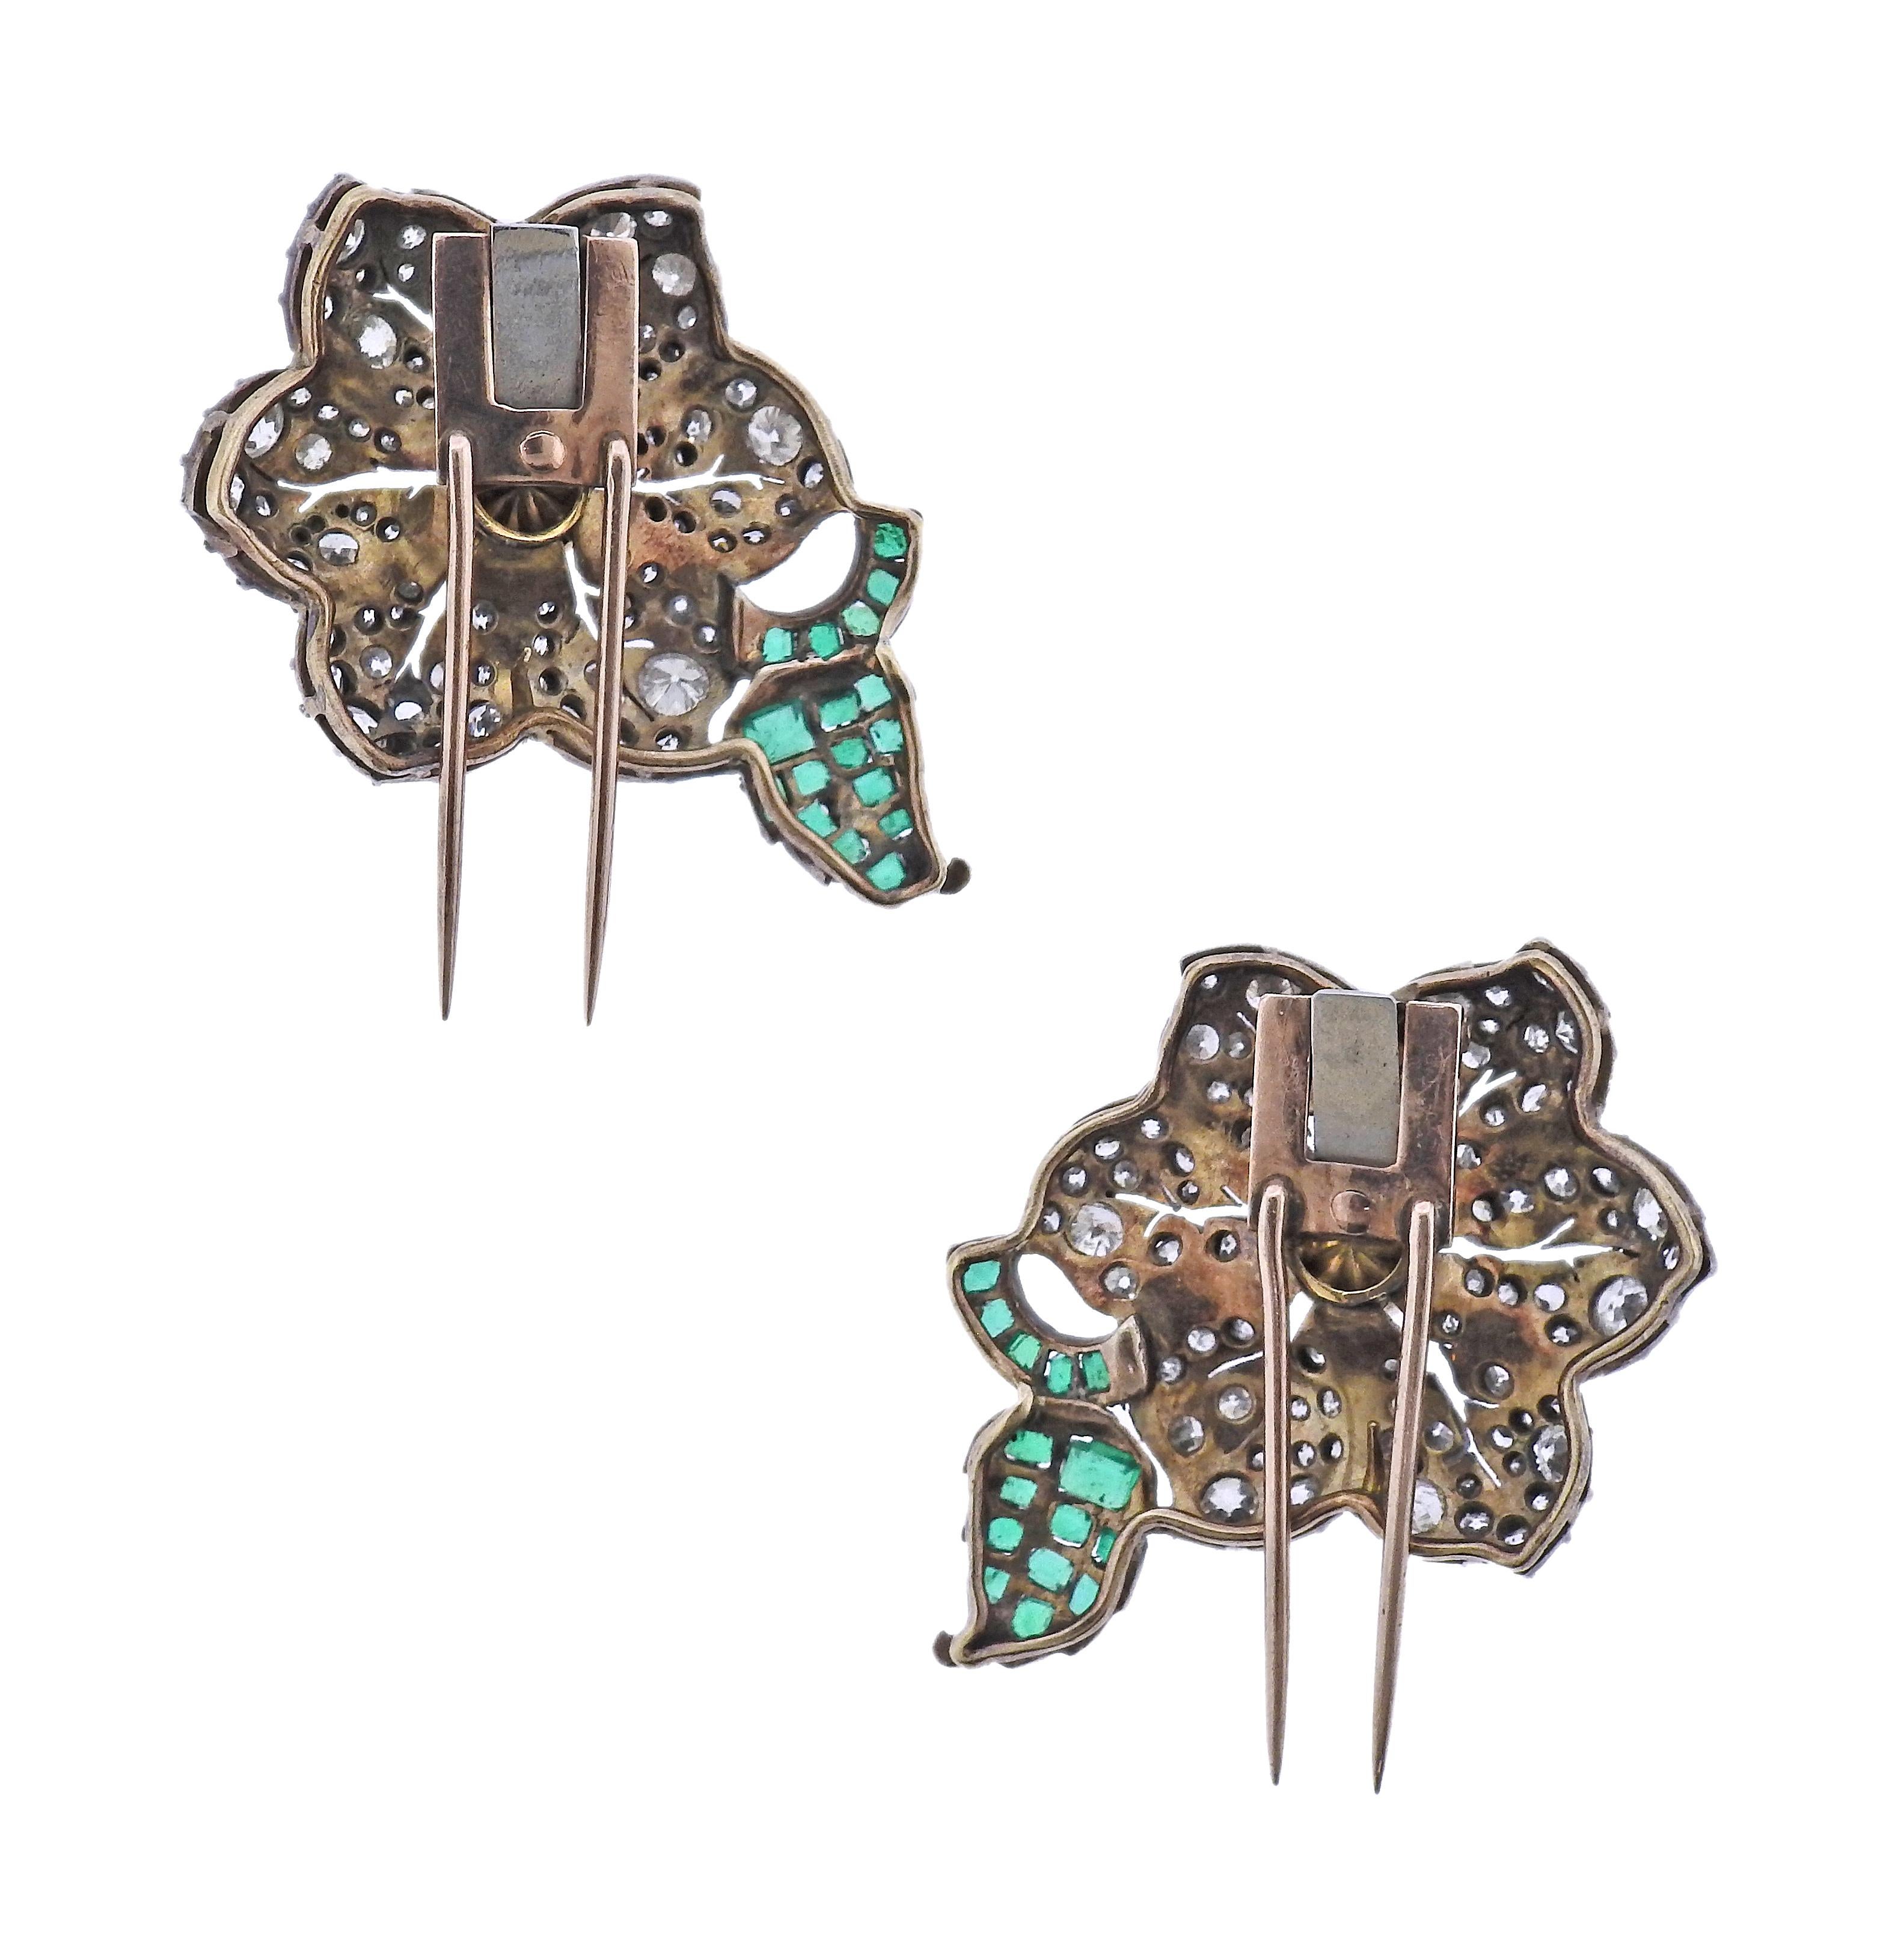 Set of two gold and silver Victorian flower brooches, each set with 6-6.5mm pearl in the center, emeralds and approx. 2.50-2.60ctw in old mine cut diamonds. Each brooch measures 36mm x 25mm. Weight of the set - 17.9 grams.